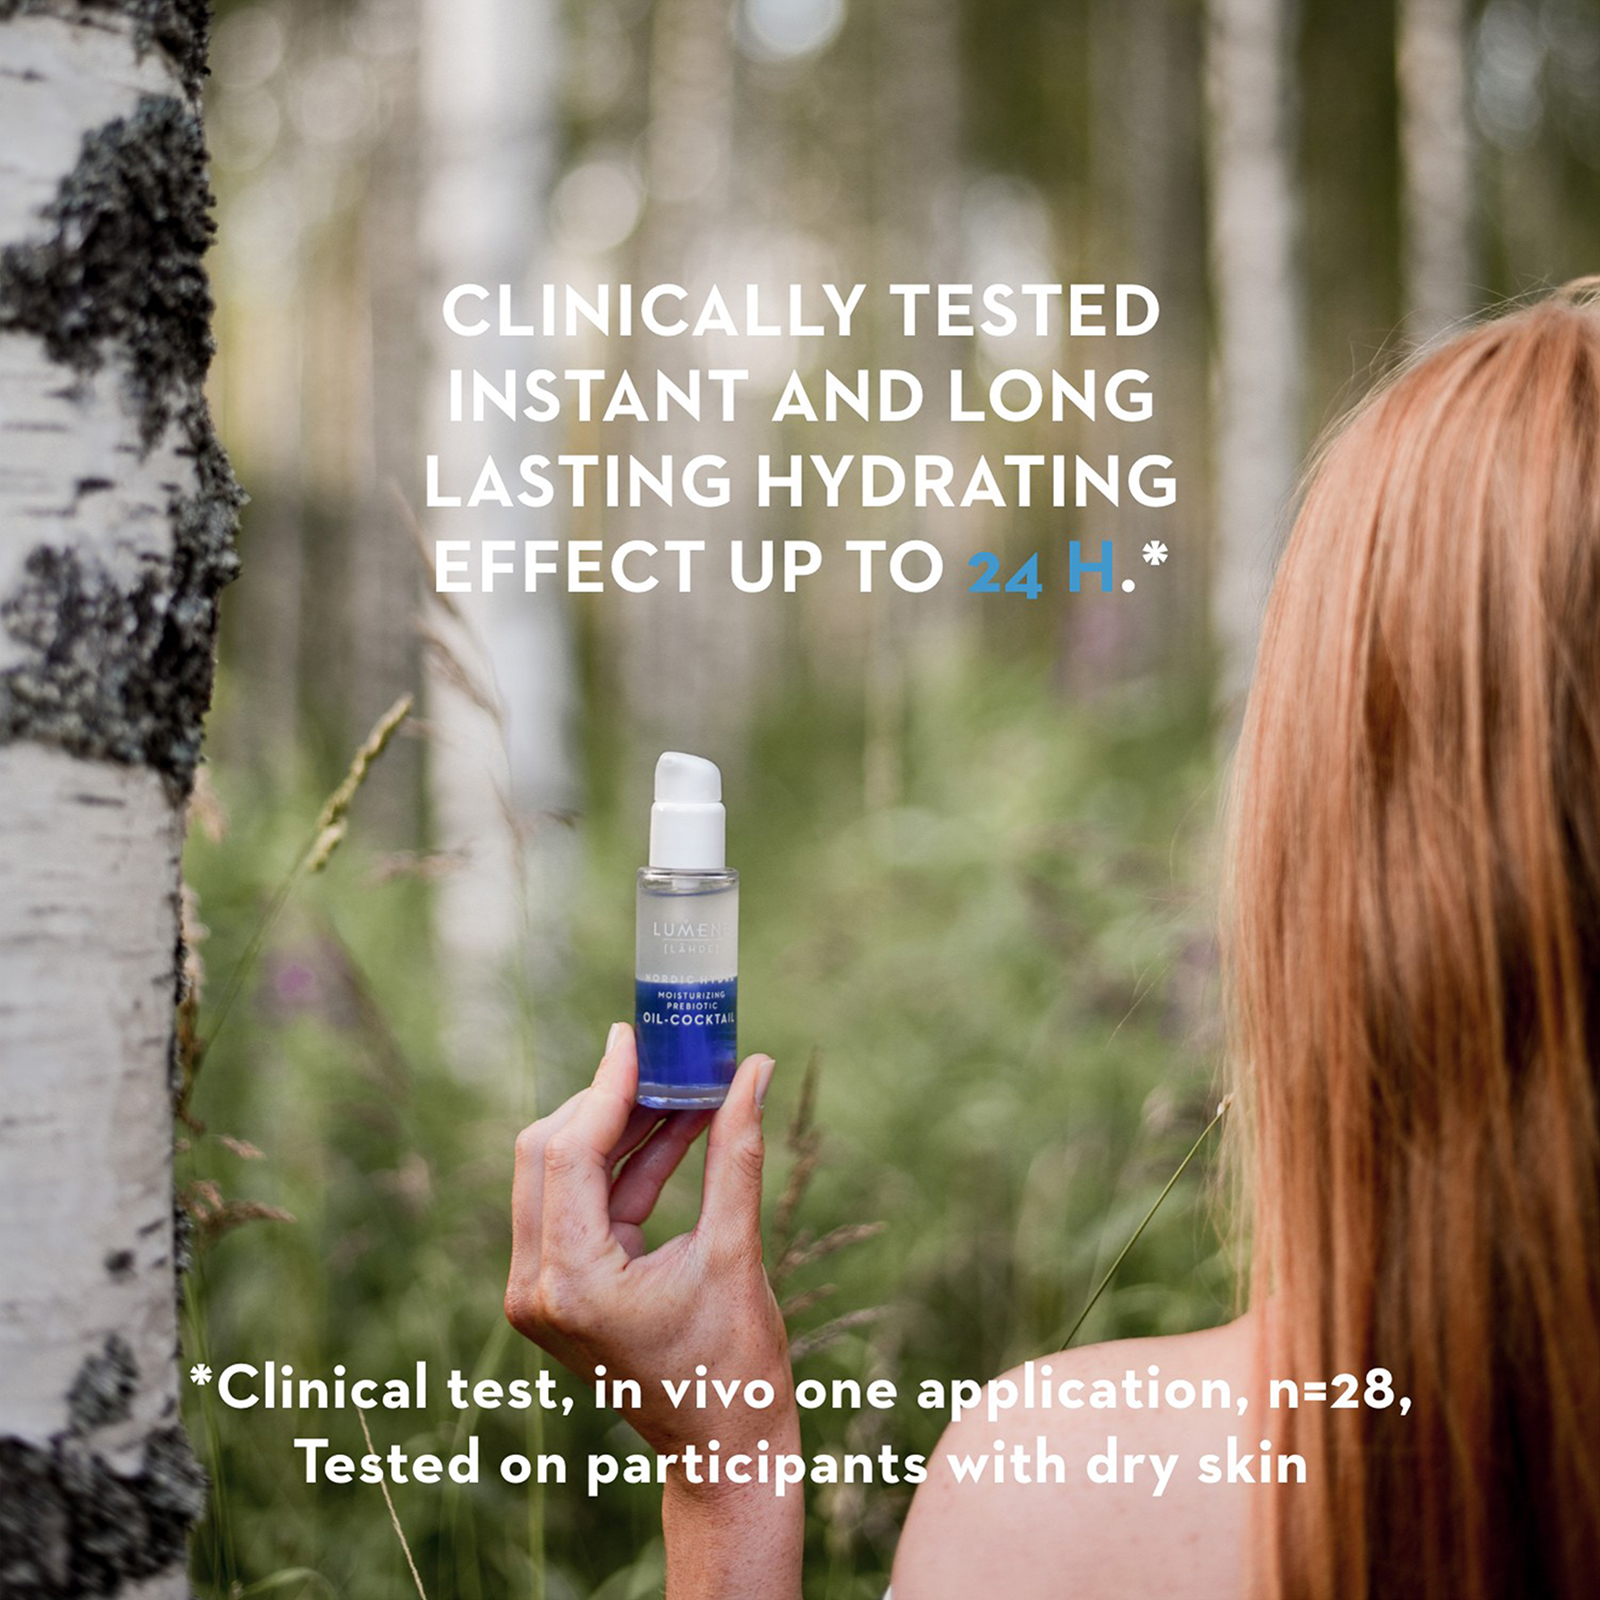 CLINICALLY TESTED INSTANT AND LONG LASTING HYDRATING EFFECT UP TO 41.**Clinical test, in vivo one application, n=28, Tested on participants with dry skin